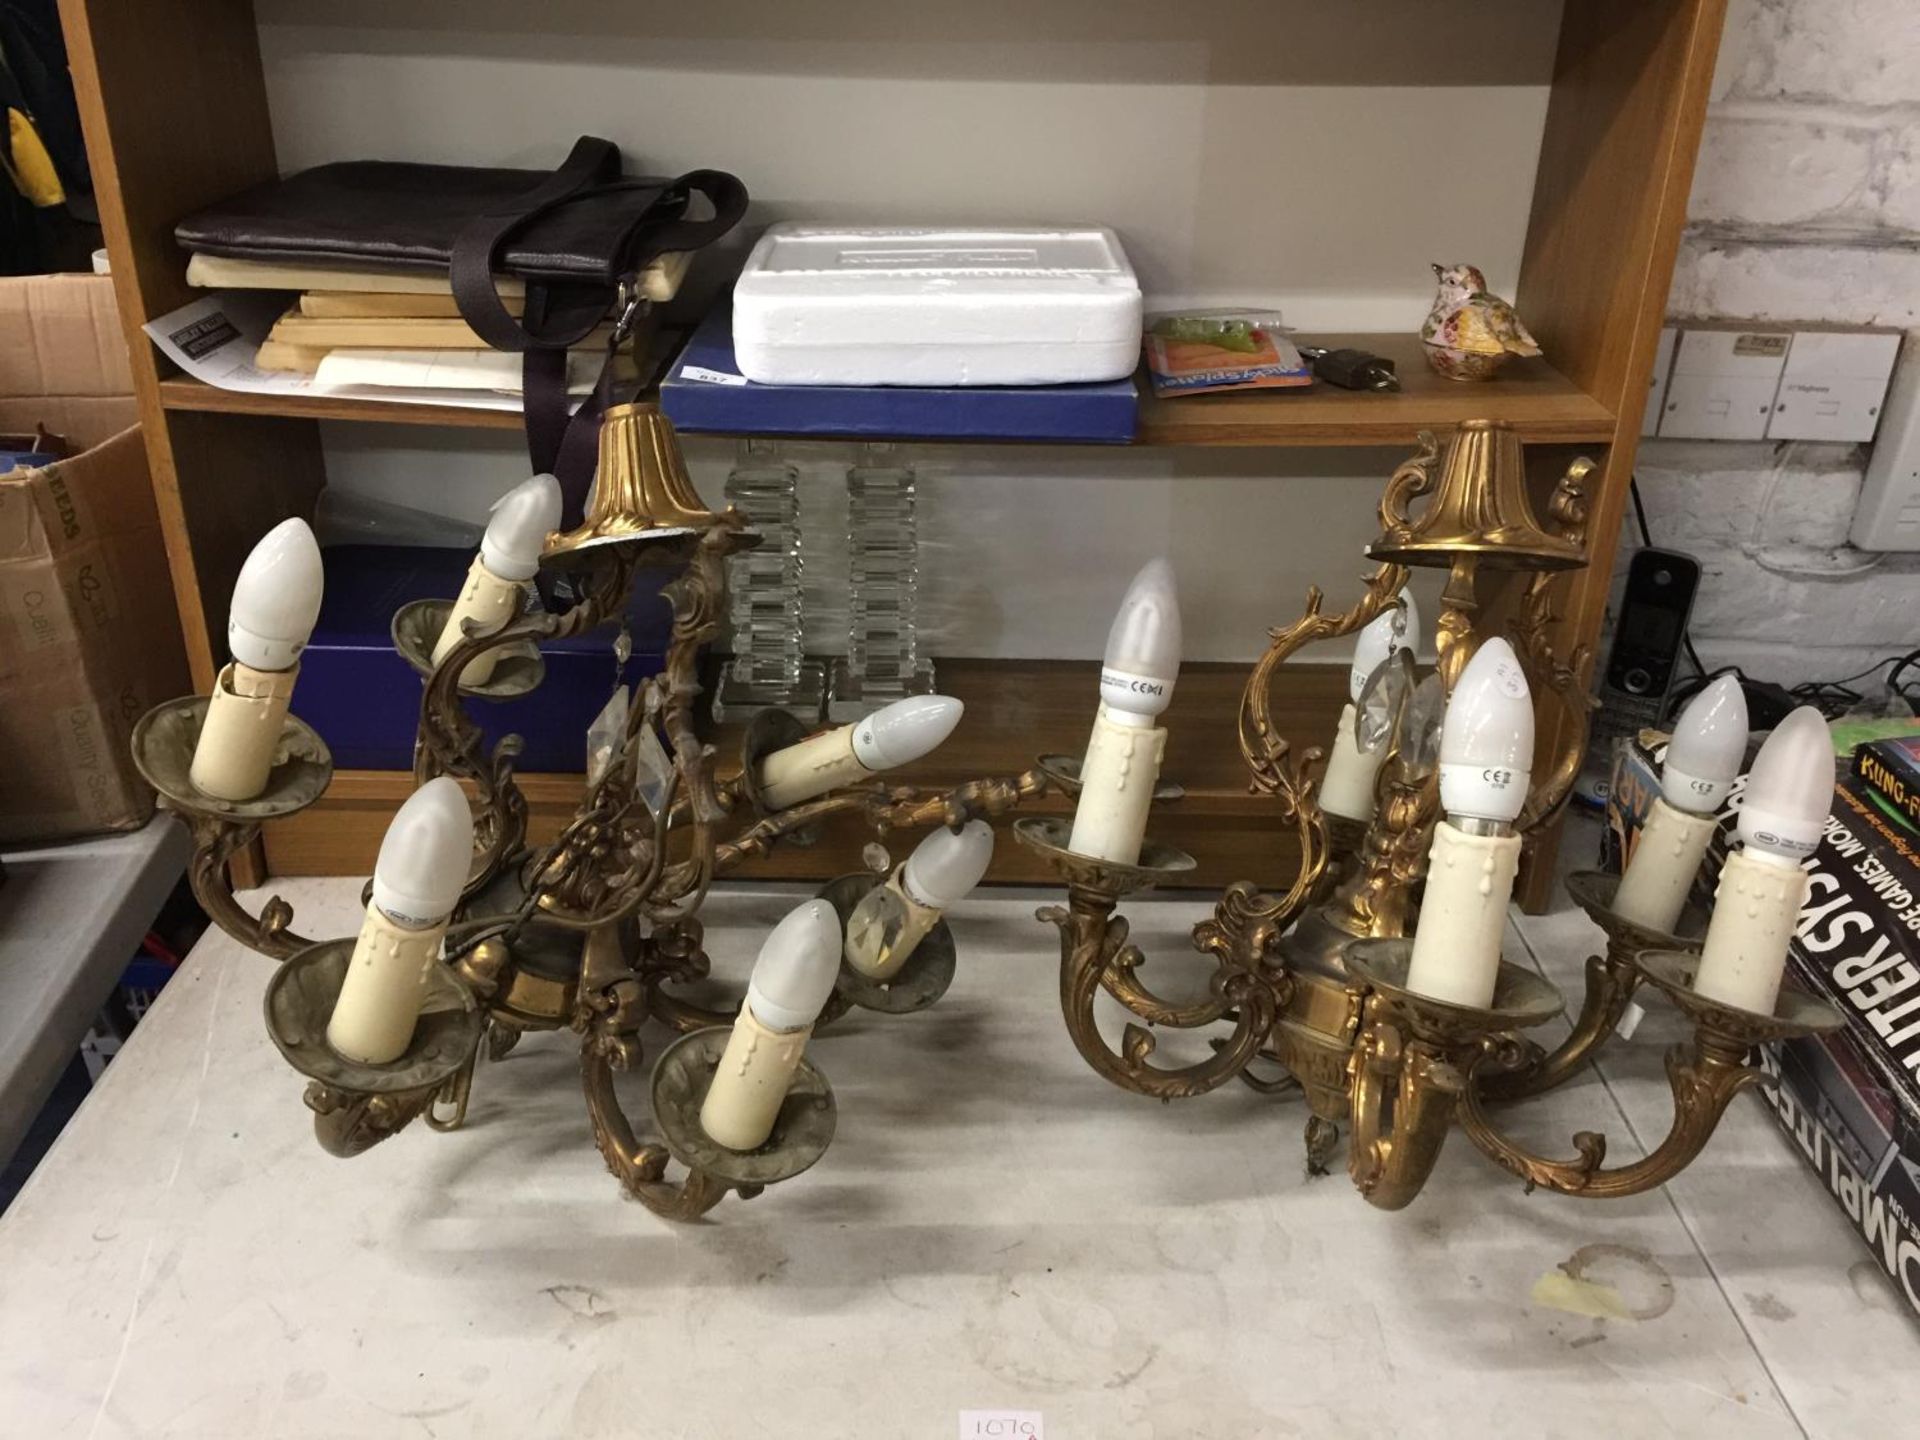 A PAIR OF VINTAGE BRASS CHANDELIERS